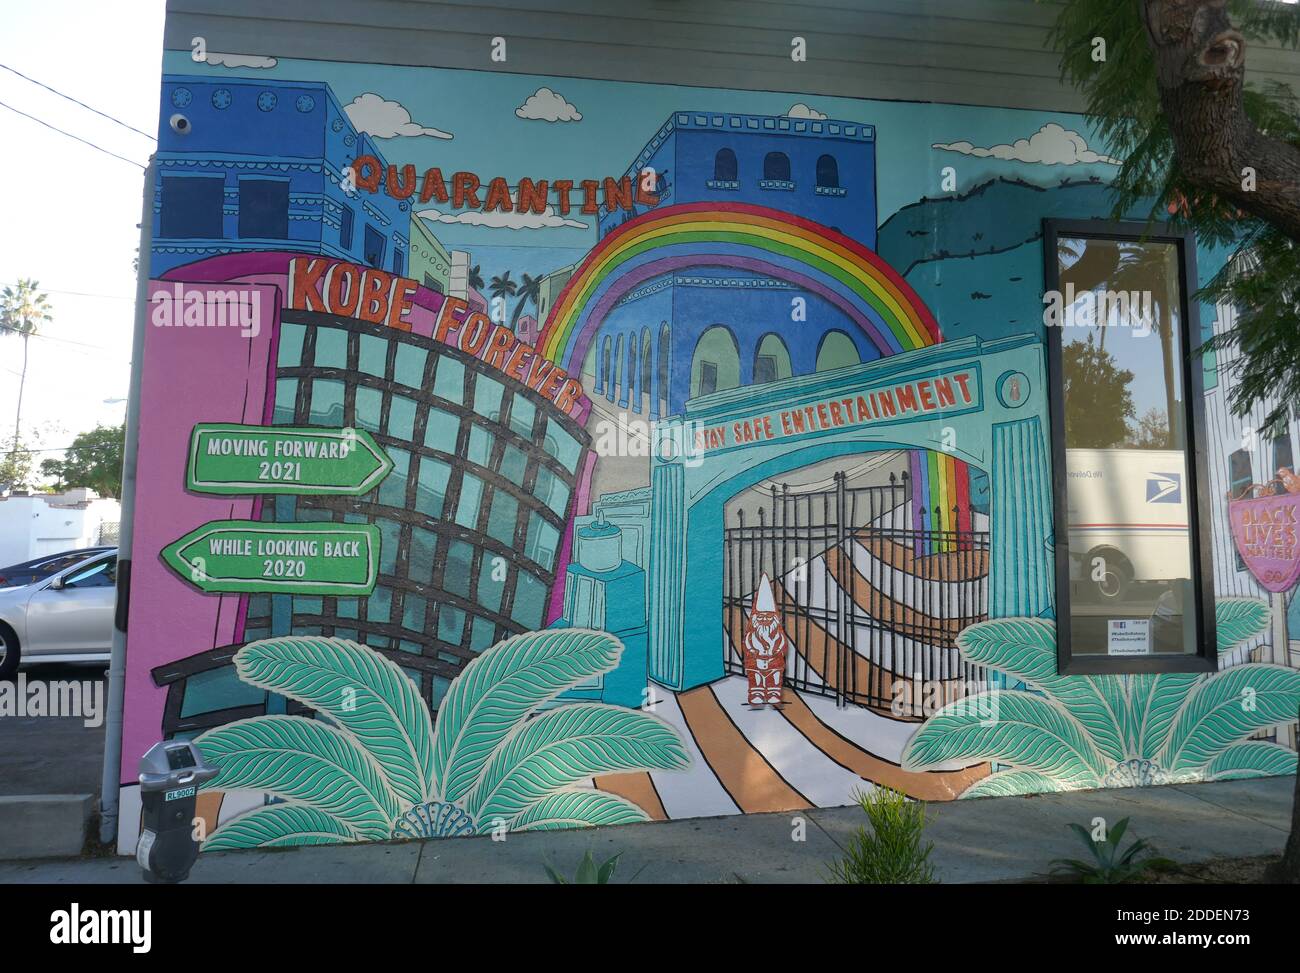 Los Angeles, California, USA 24th November 2020 A general view of atmosphere of Street Art Mural during Coronavirus Covid-19 pandemic on November 24, 2020 in Los Angeles, California, USA. Photo by Barry King/Alamy Stock Photo Stock Photo